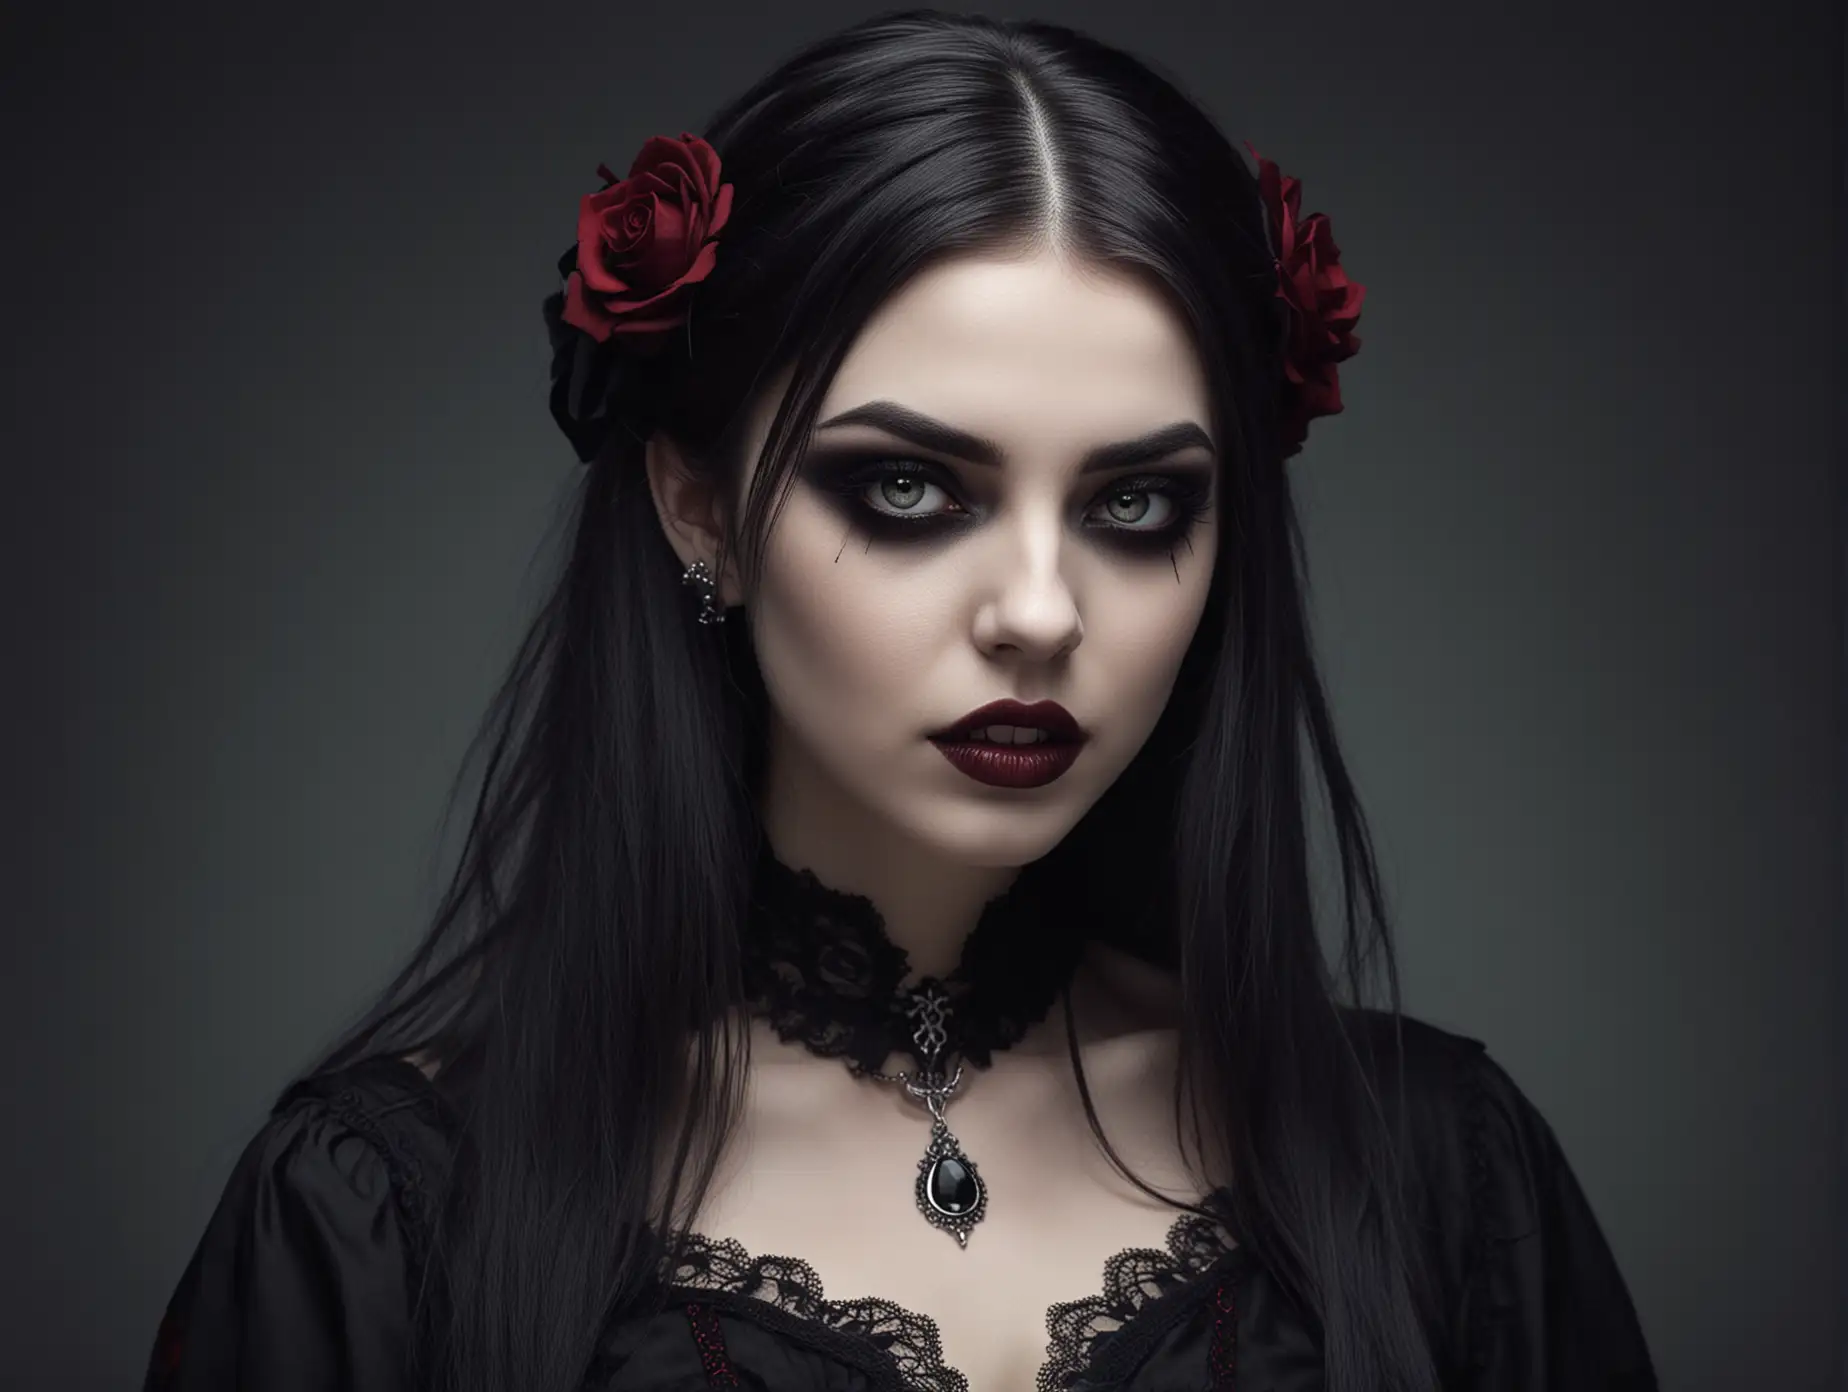 Dark Gothic Vampire Girl with Stylish Outfit and Fiery Eyes